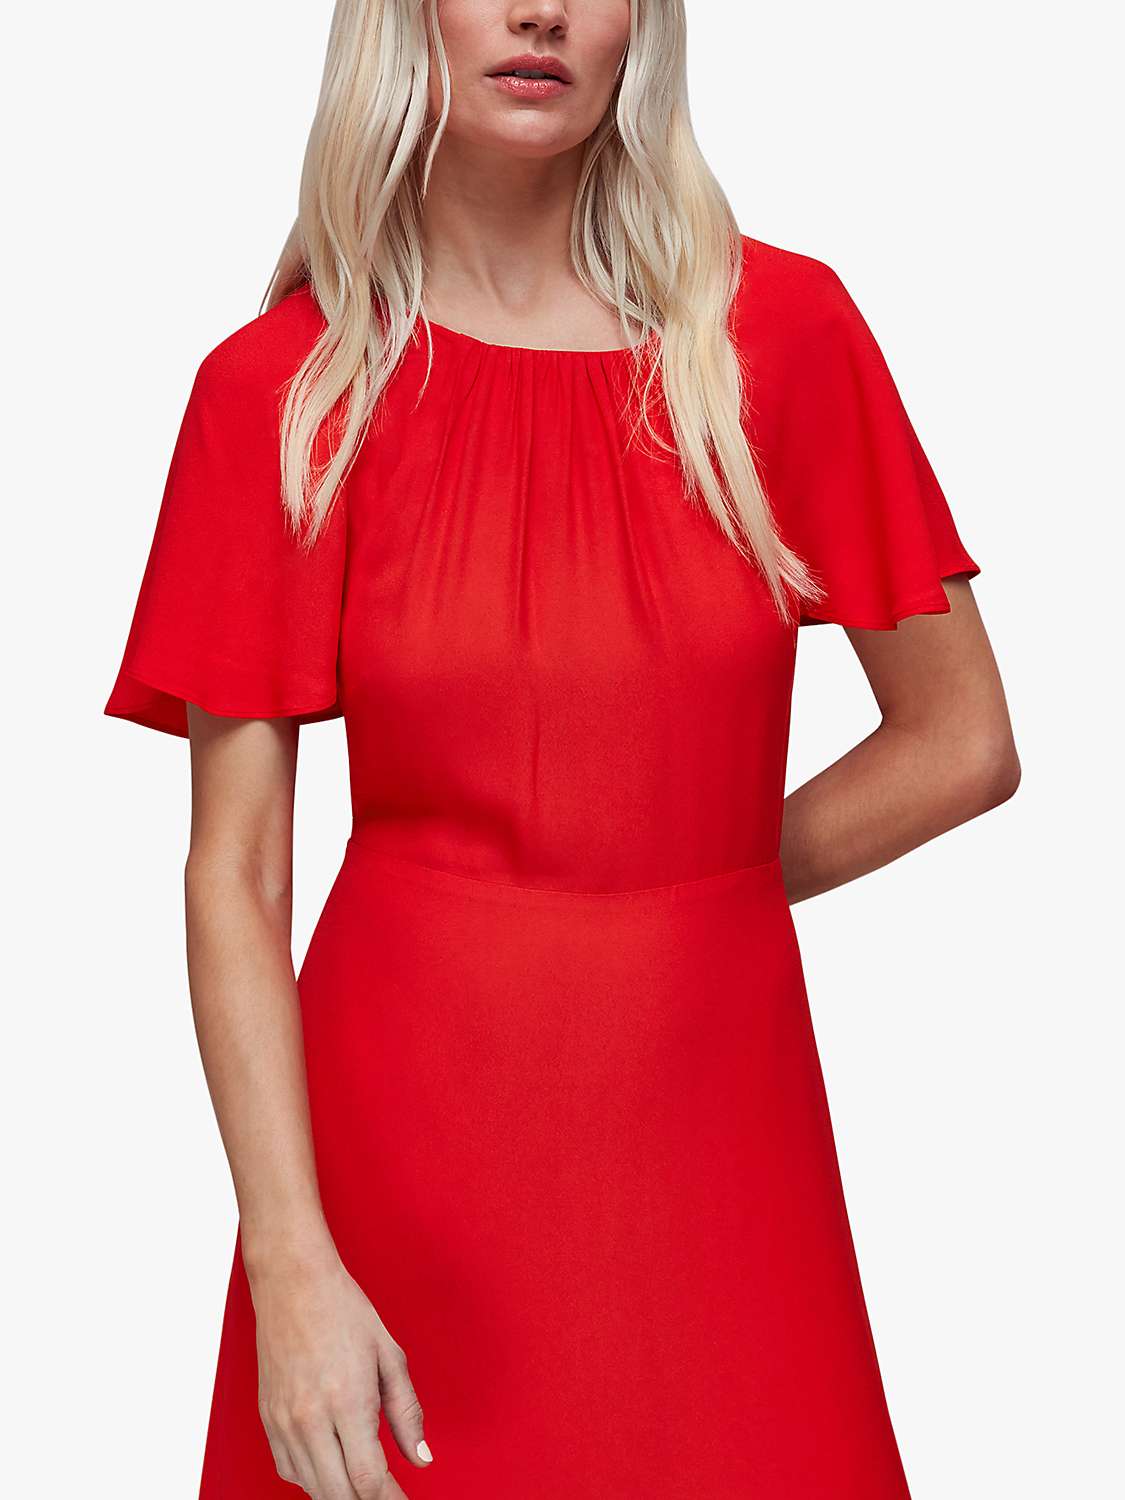 Buy Whistles Petite Annabelle Cape Sleeve Midi Dress, Red Online at johnlewis.com